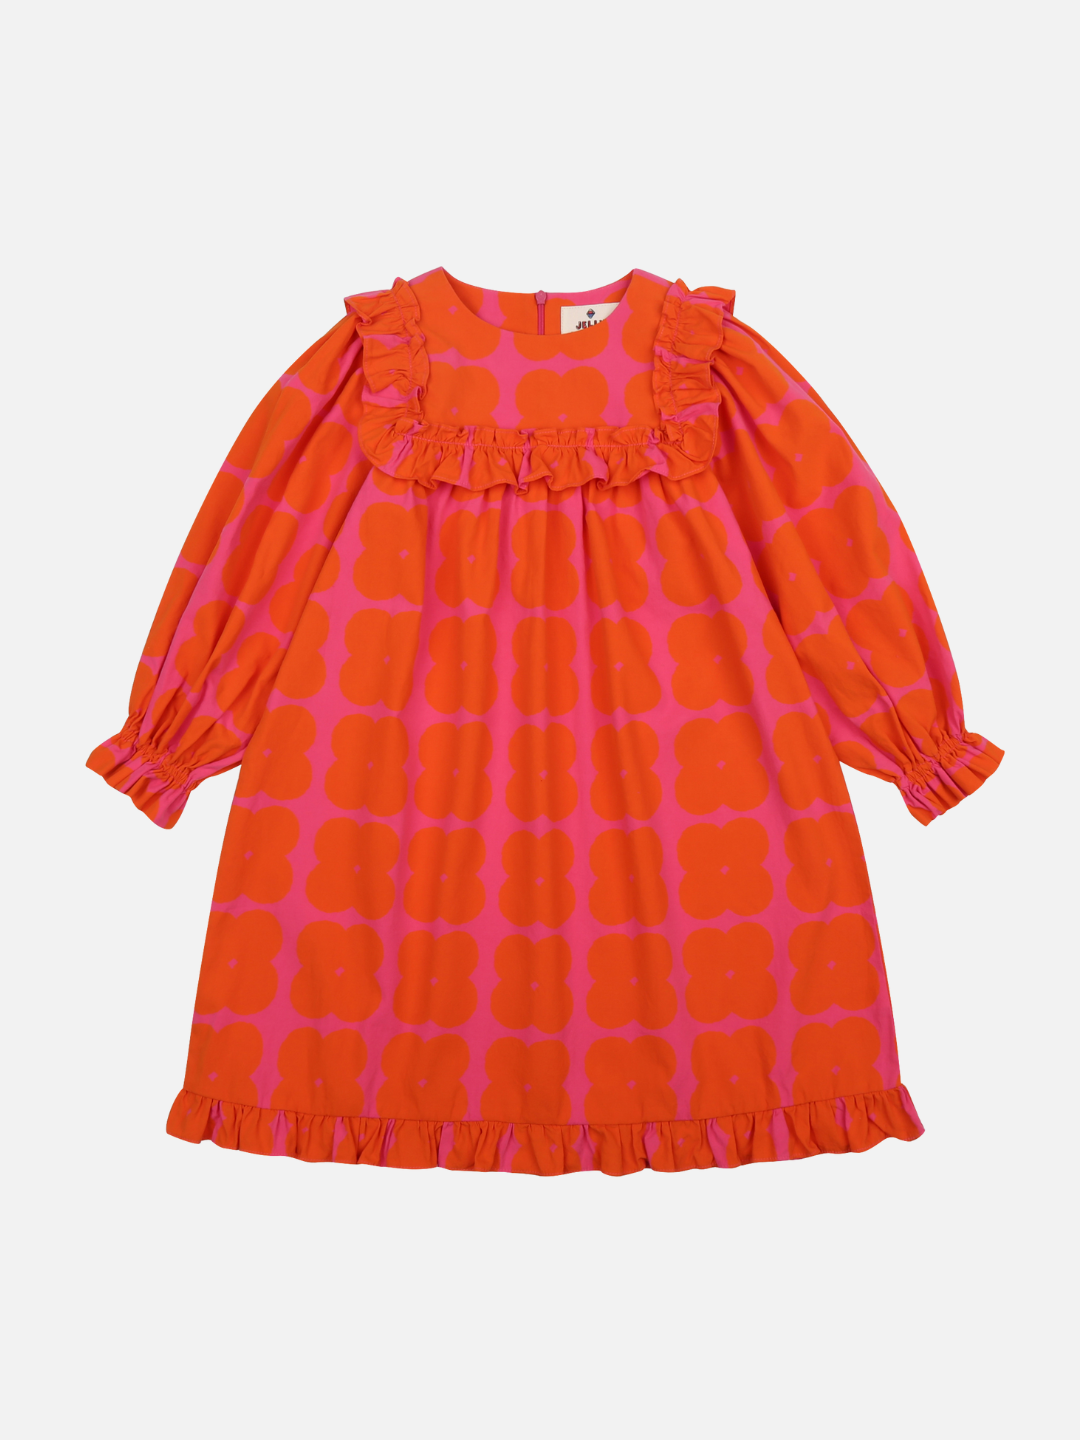 Front of Clover Dress. Bright red and pink dress with a ruffled hem, long sleeves with pleats, and ruffled trim on the collar.